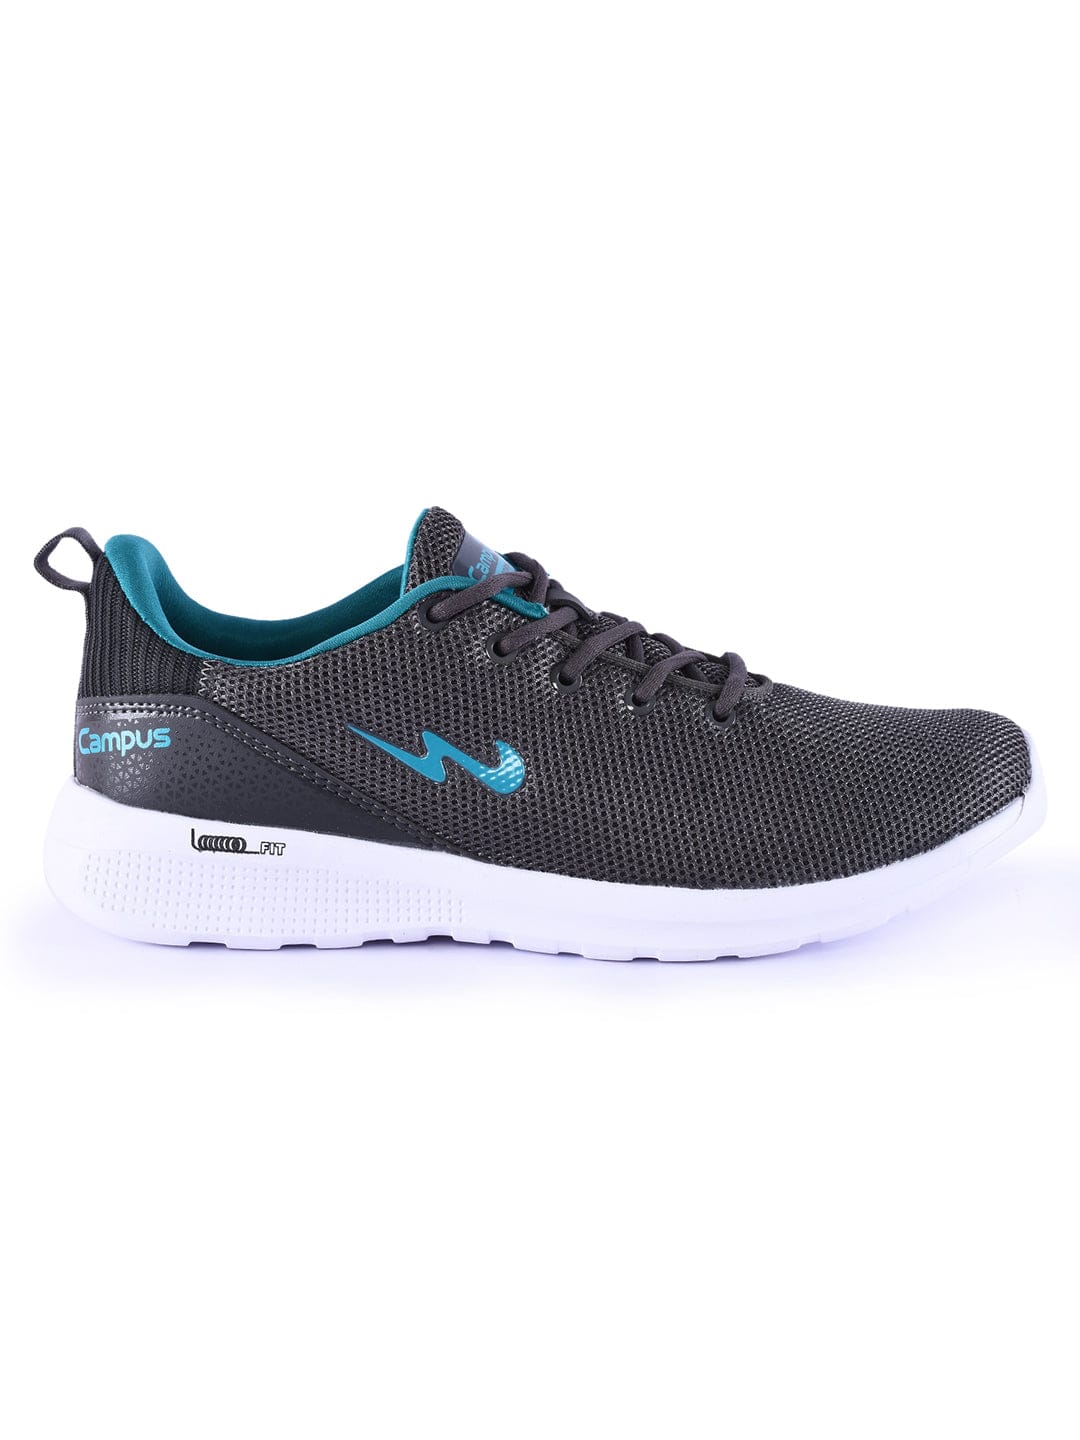 Buy Running Shoes For Men: Crunch-Cg-257Gry-T-Blu899 | Campus Shoes